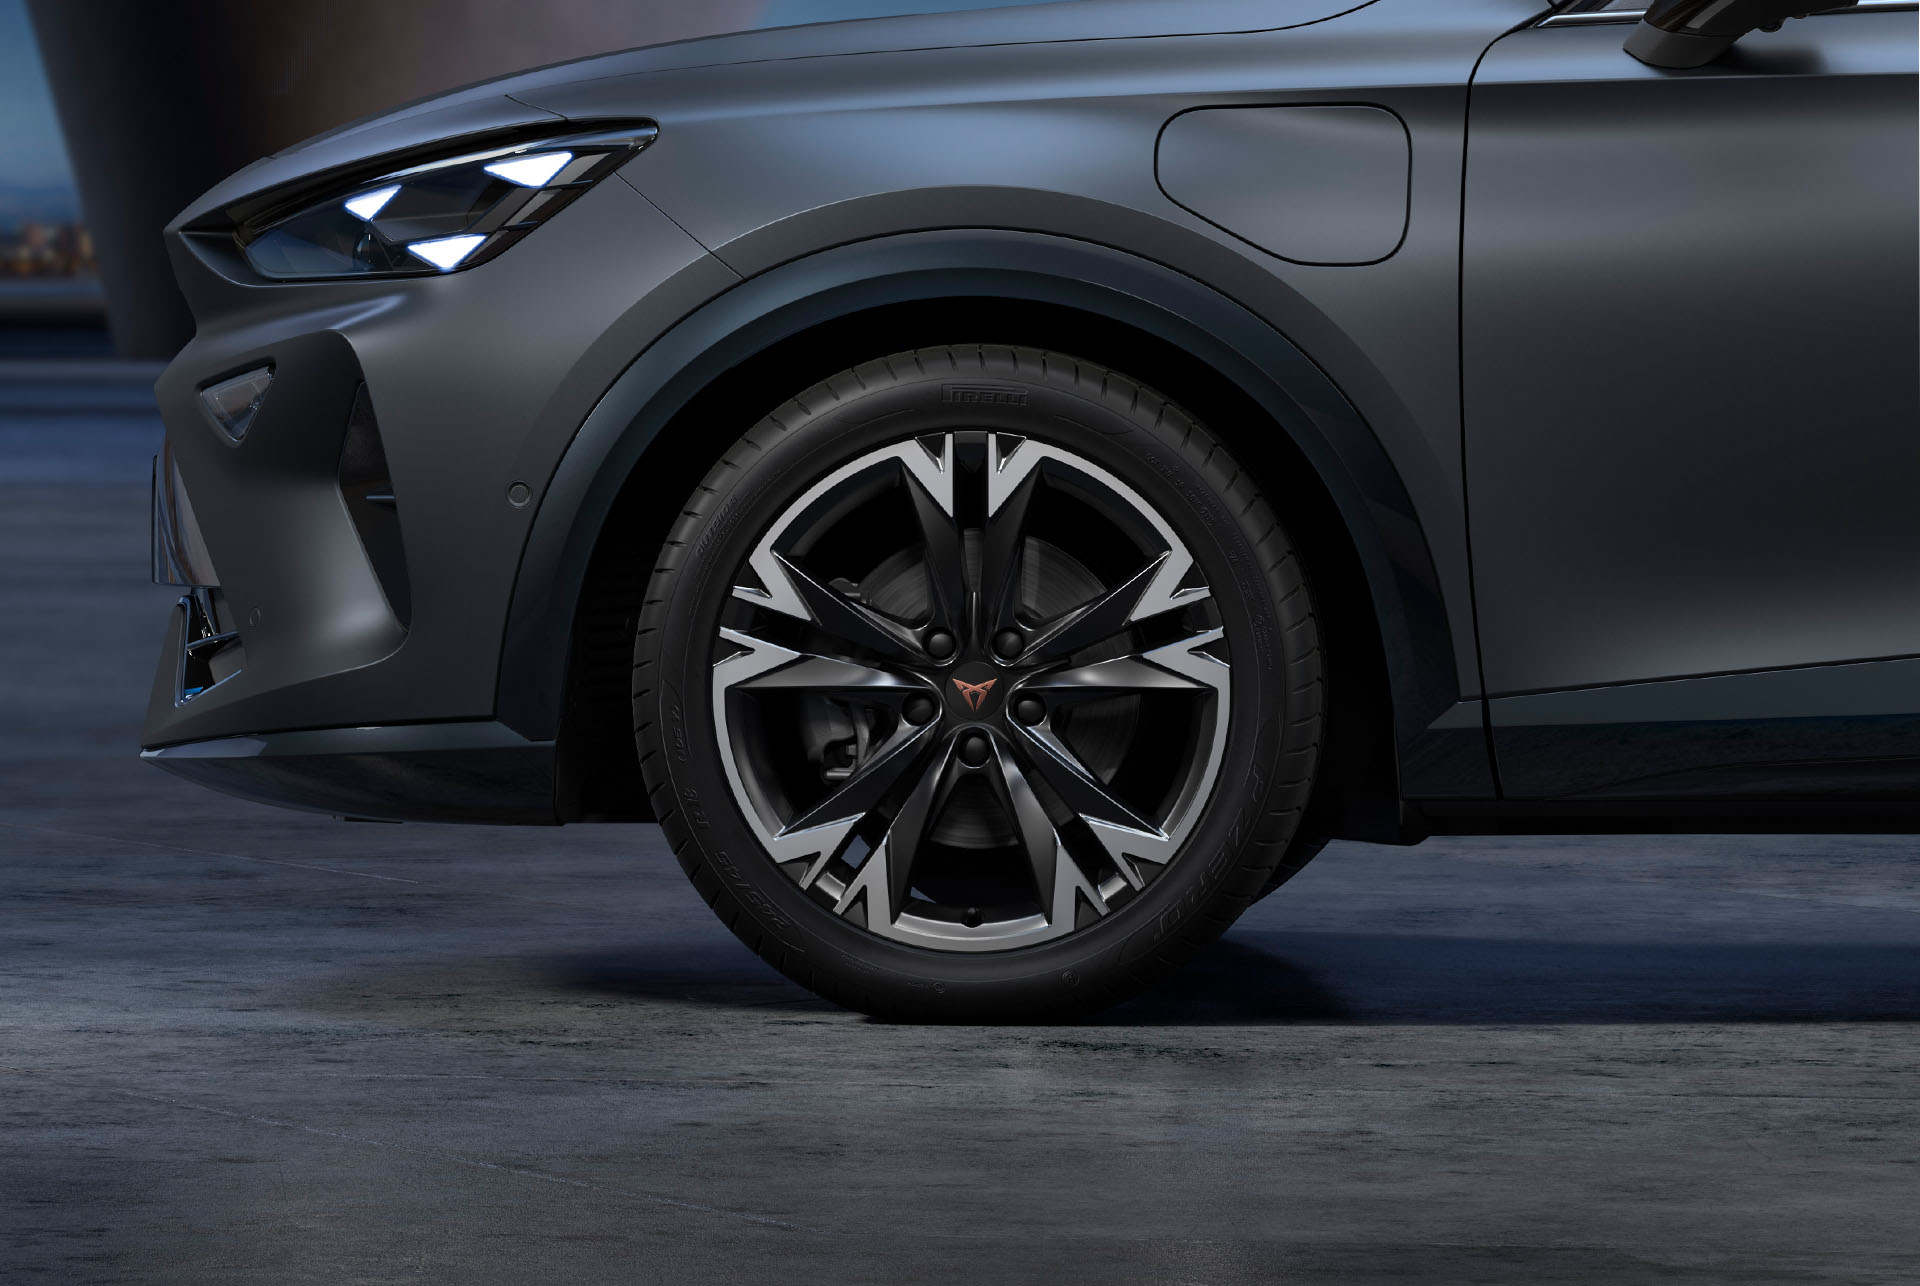 New sonora black and silver CUPRA Formentor 2024 car wheels, alloys and tyres with logo in the middle, LED headlights.